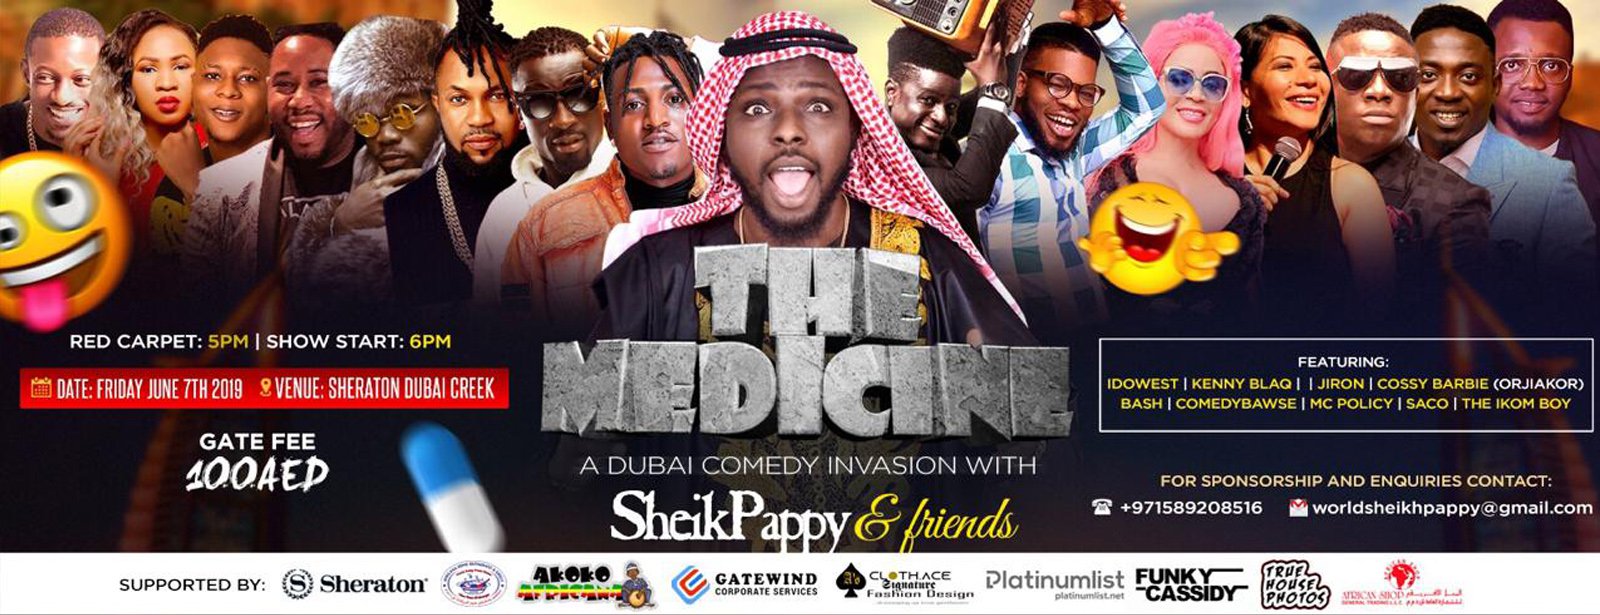 The Medicine: Sheik Pappy & Friends – A Comedy Invasion - Coming Soon in UAE